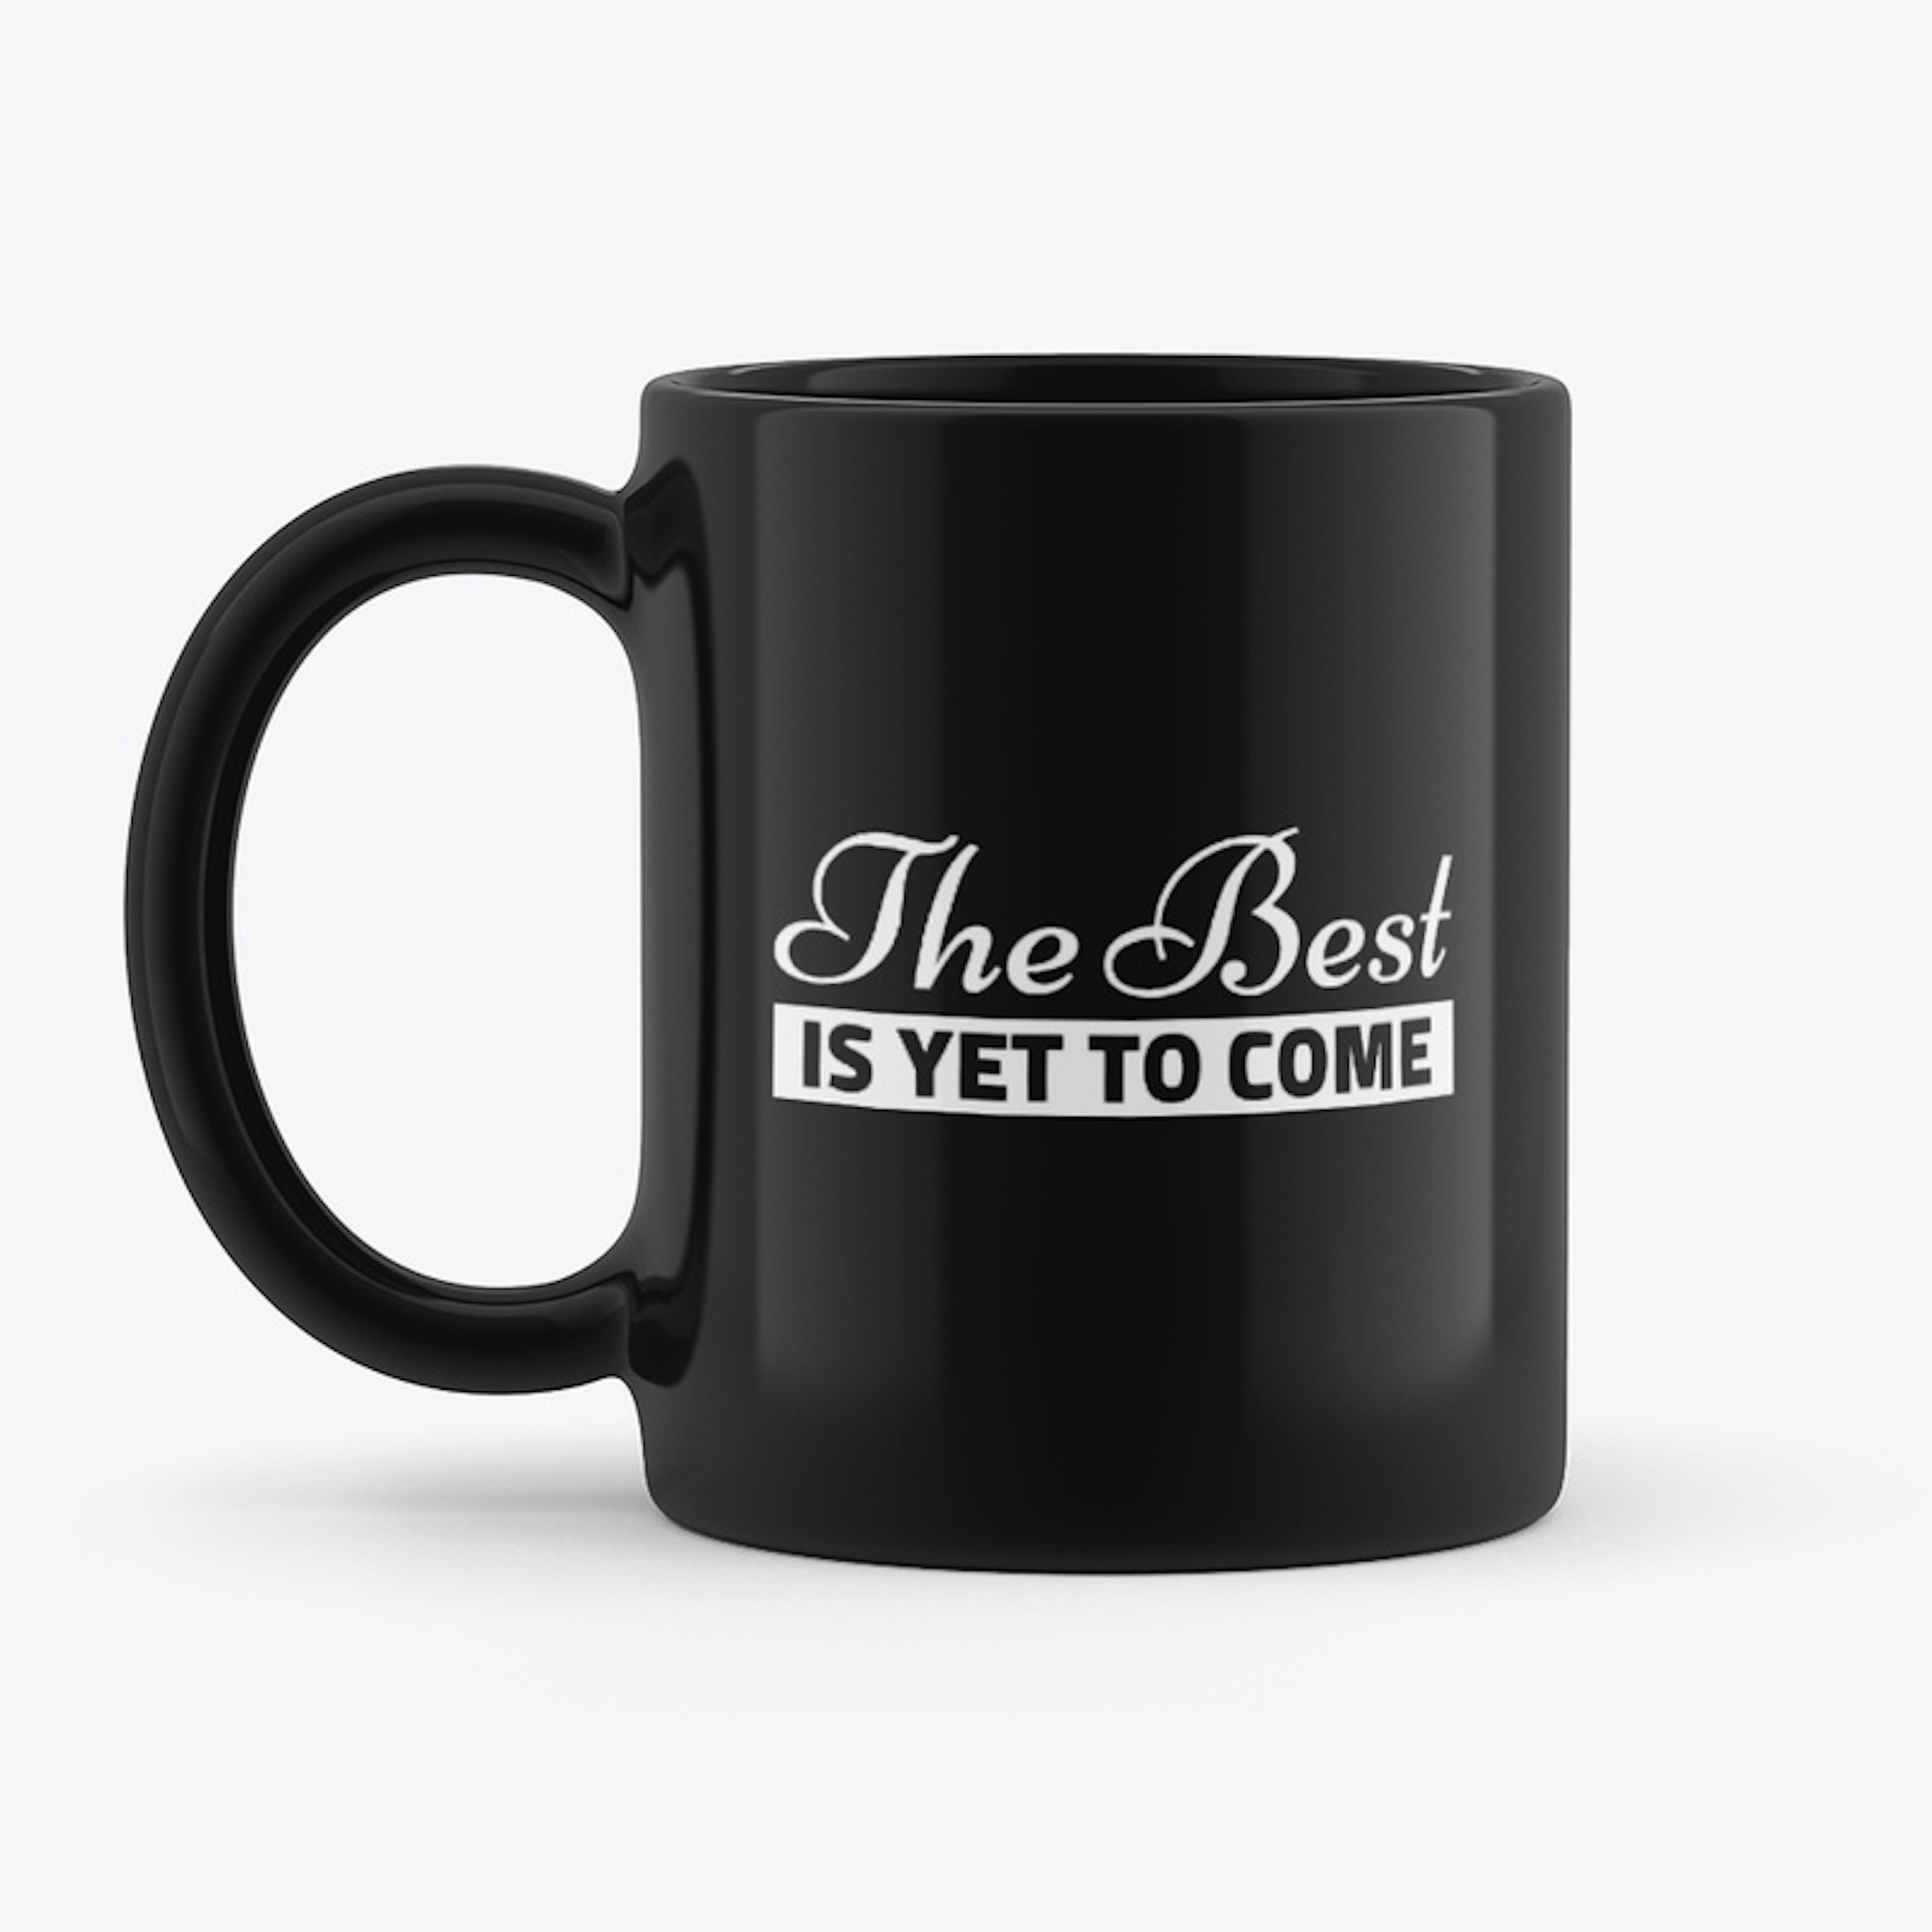 THE BEST IS YET TO COME MUG